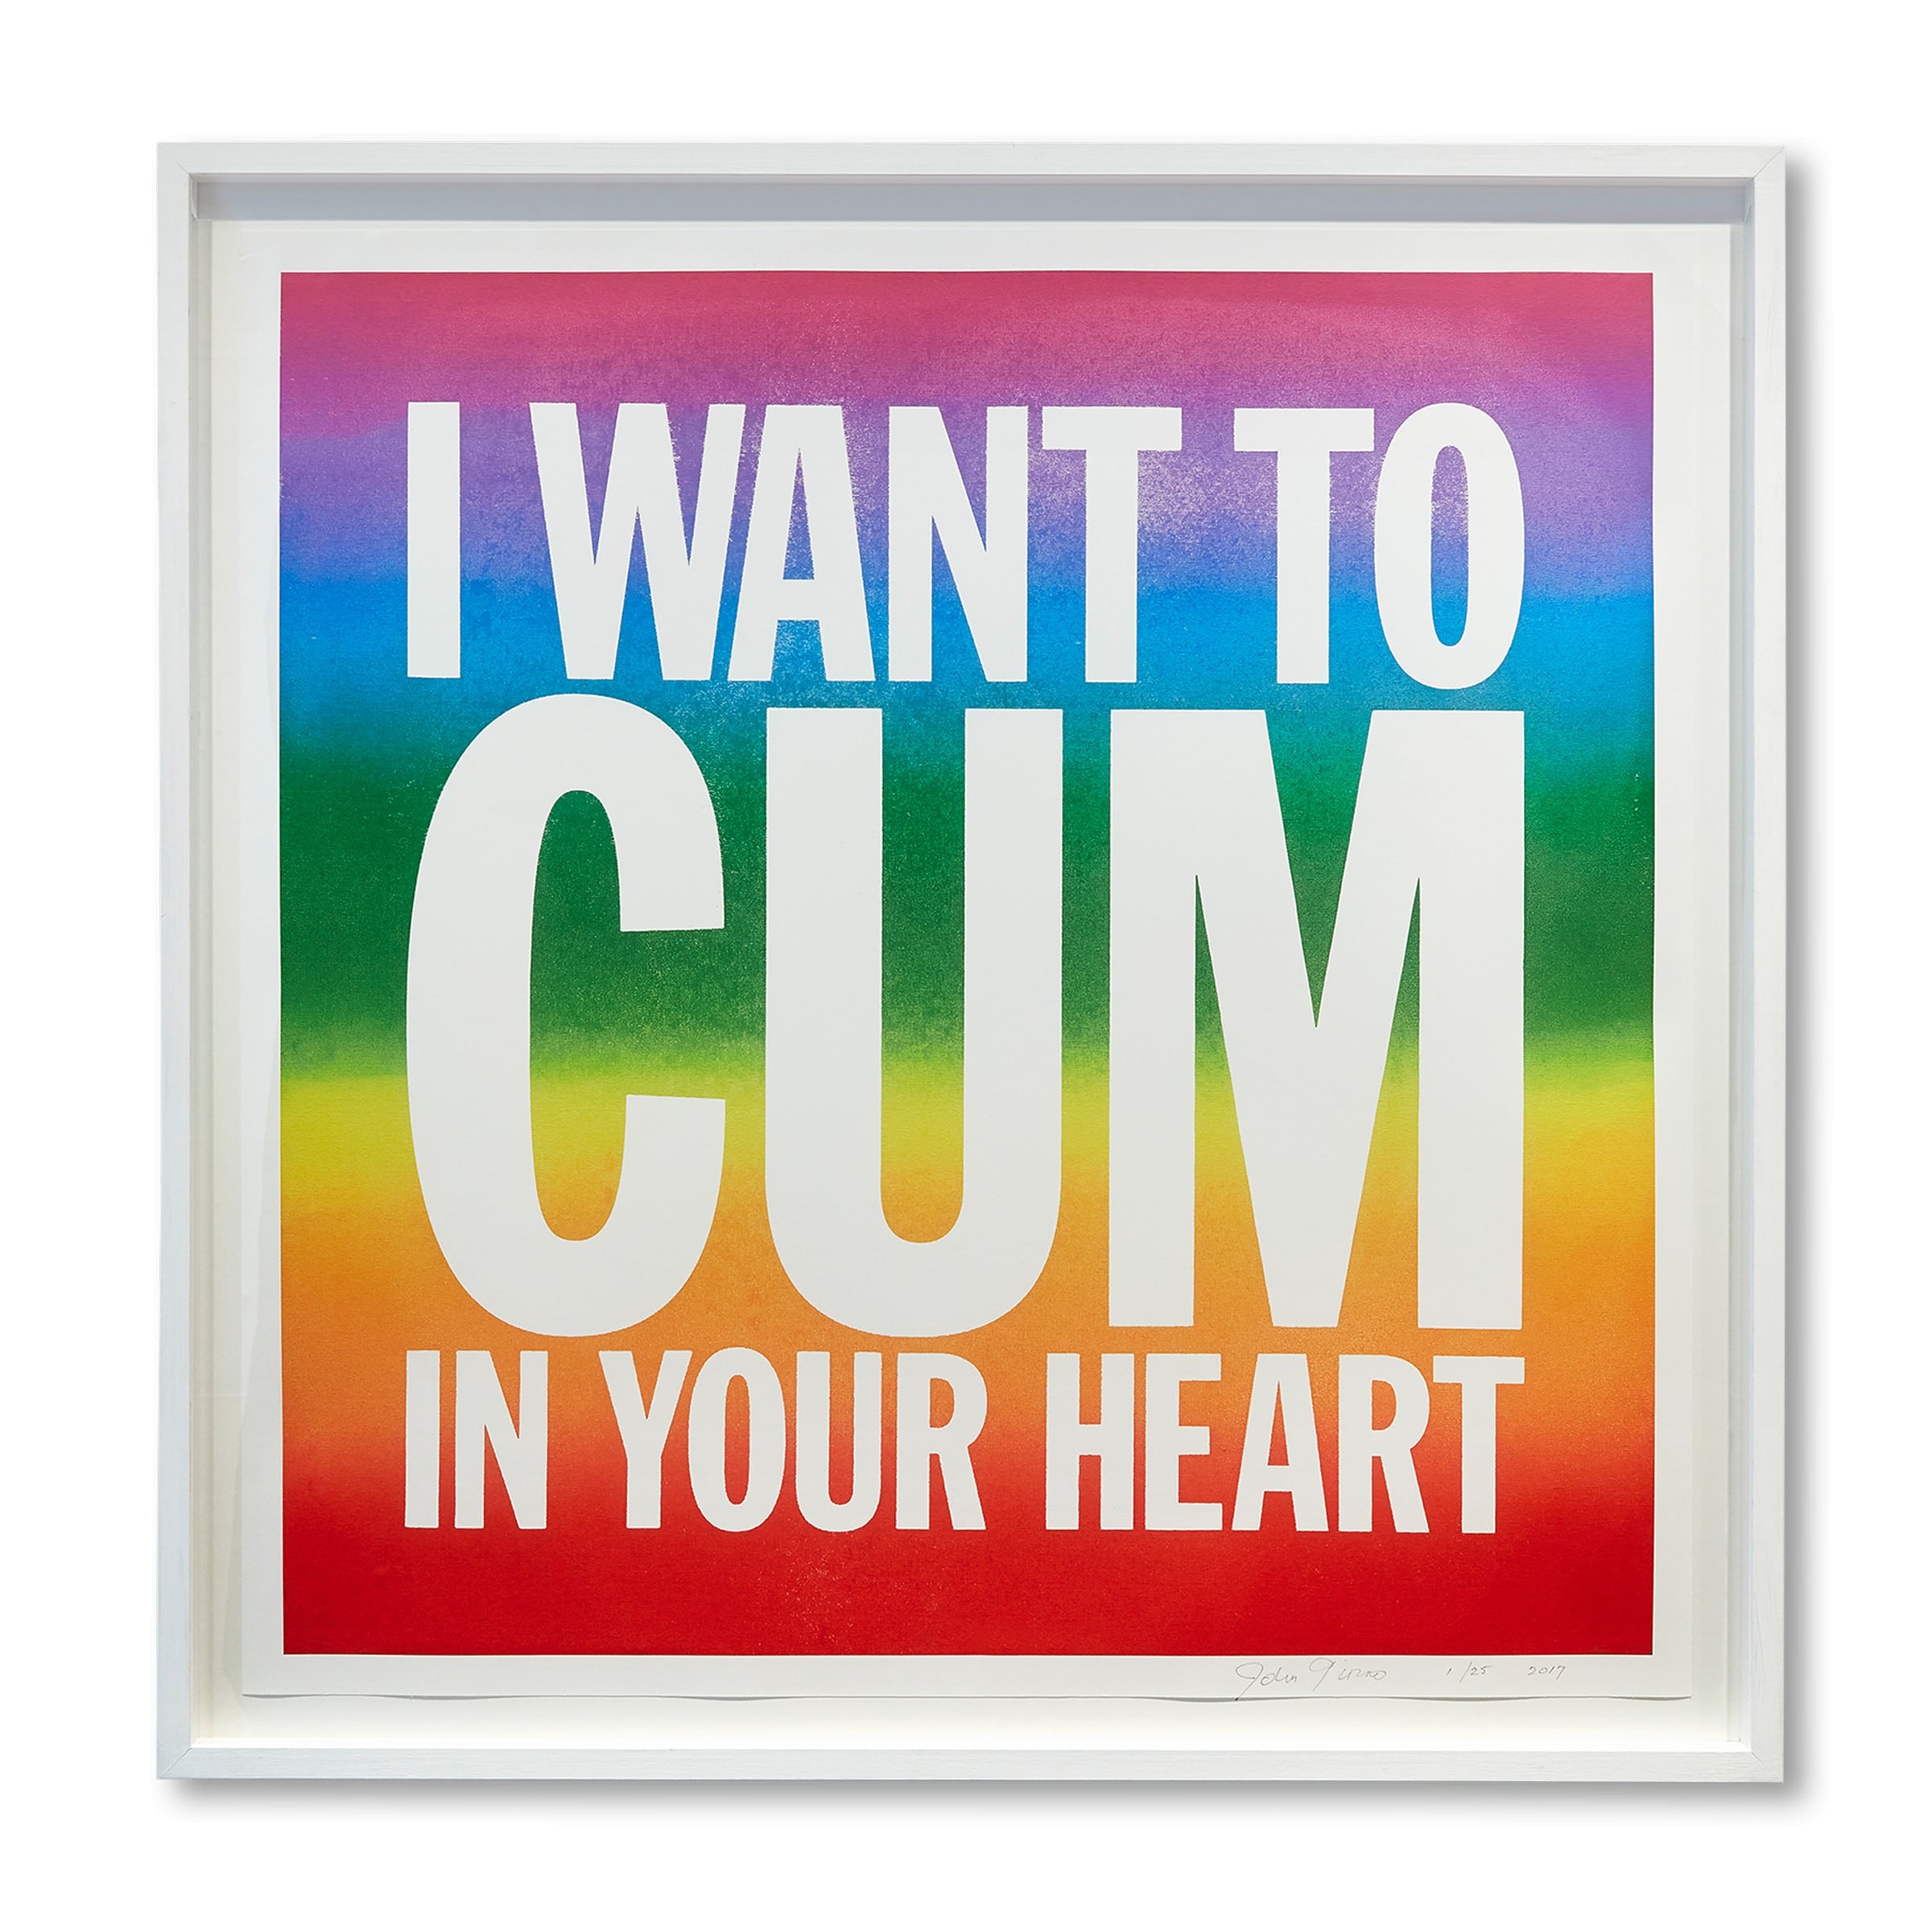 donald mutton recommends i want to cum inside pic